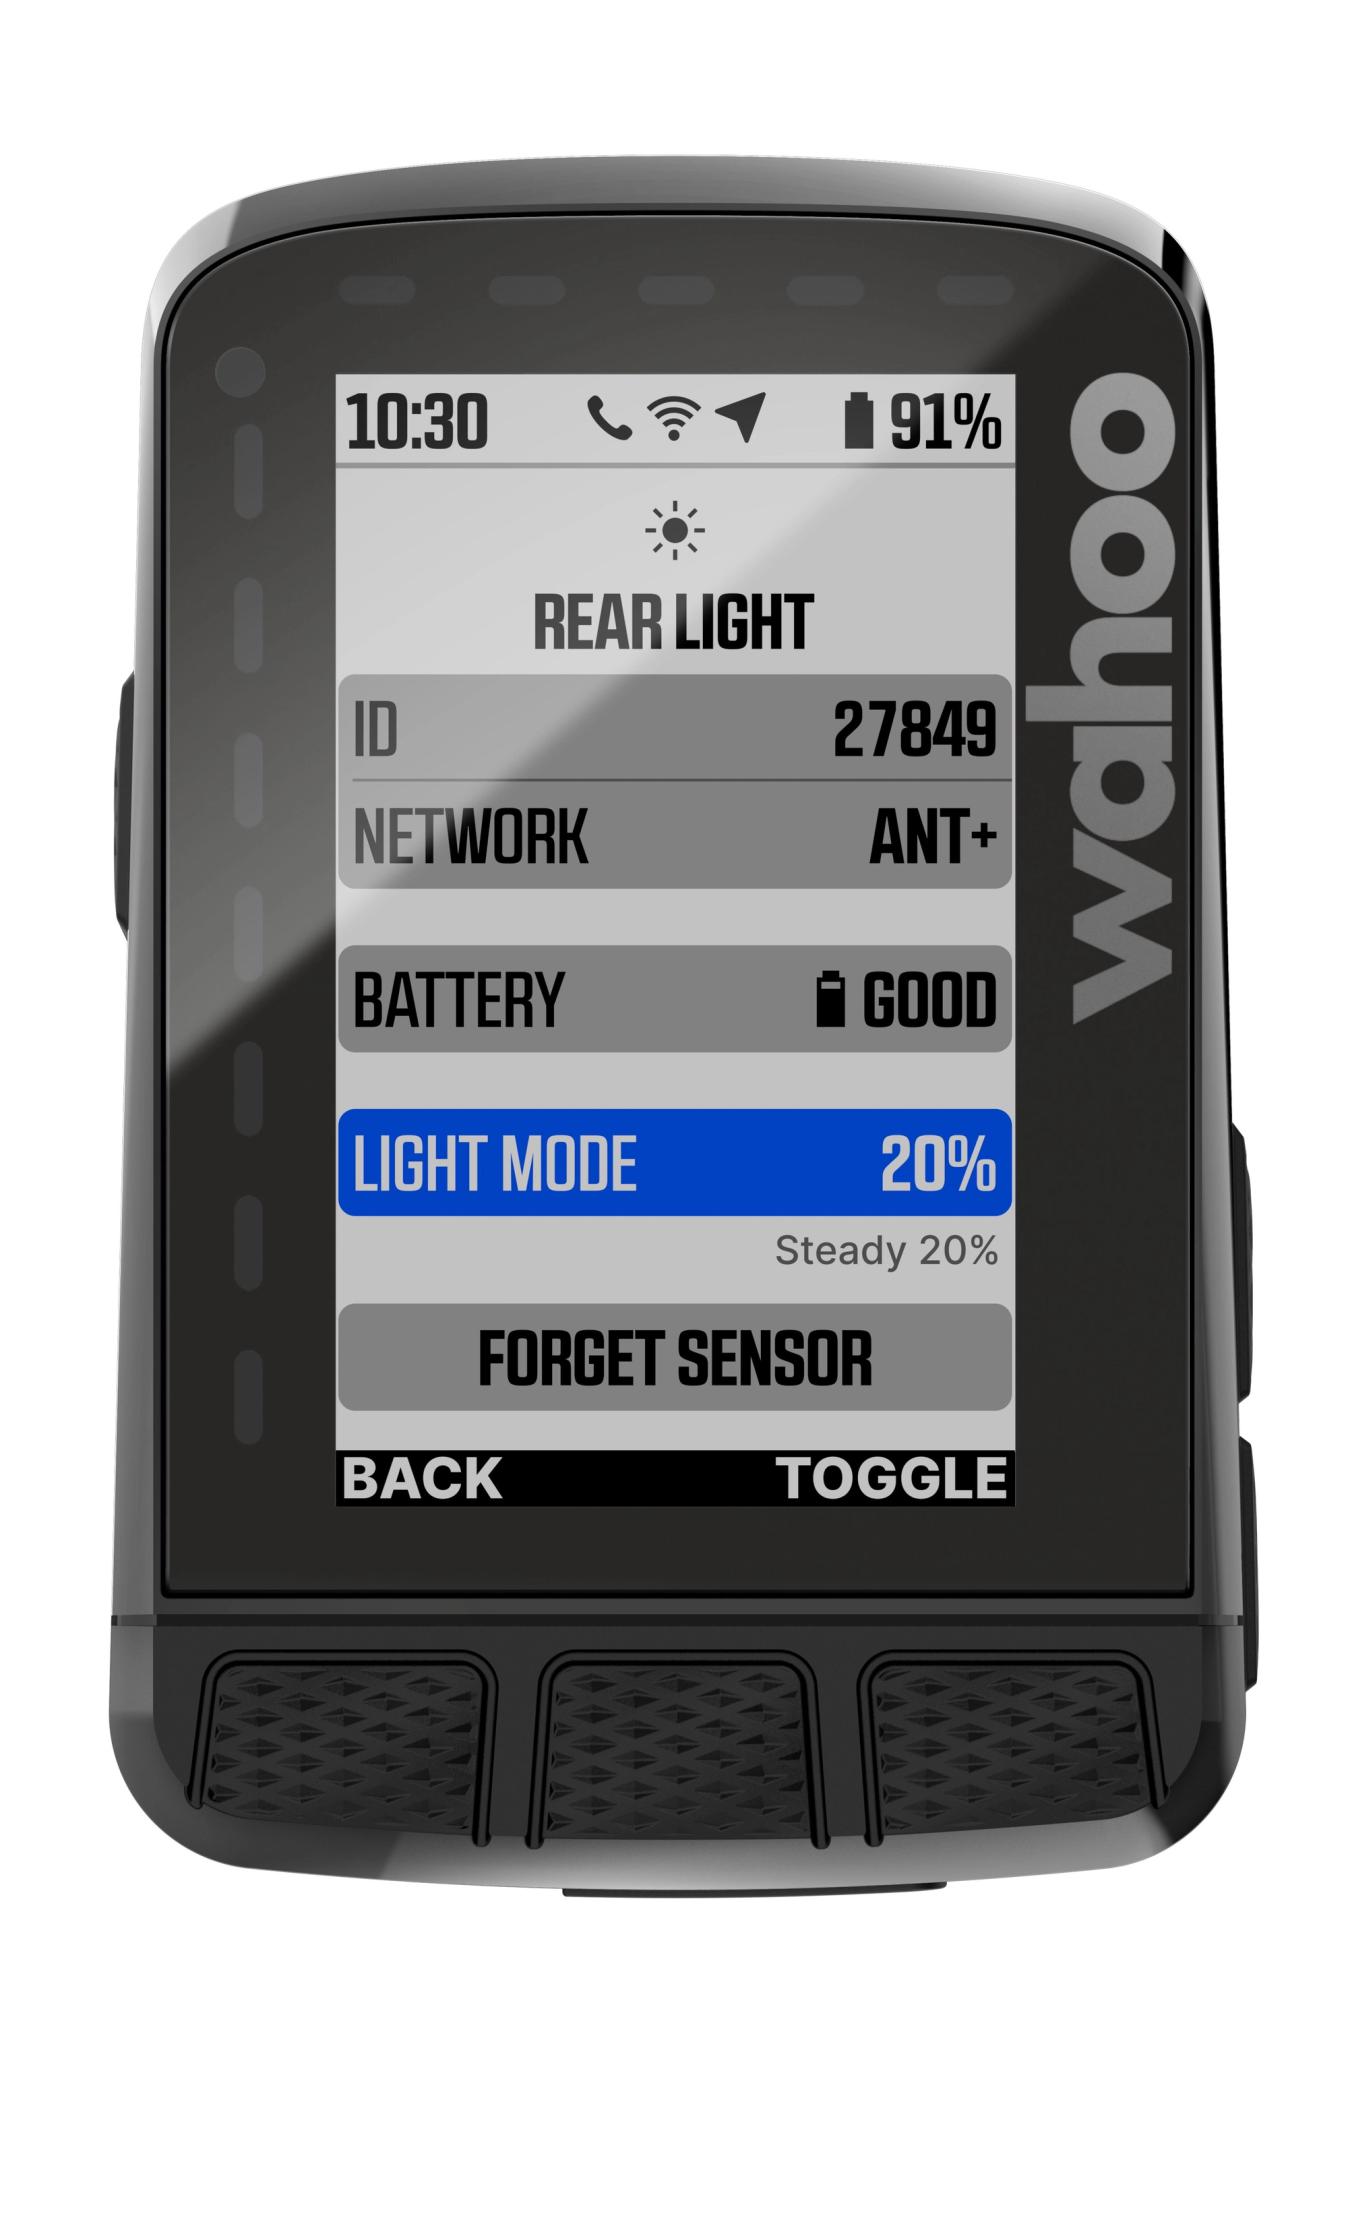 Smart bike lights can be controlled from Wahoo ELEMNT computers